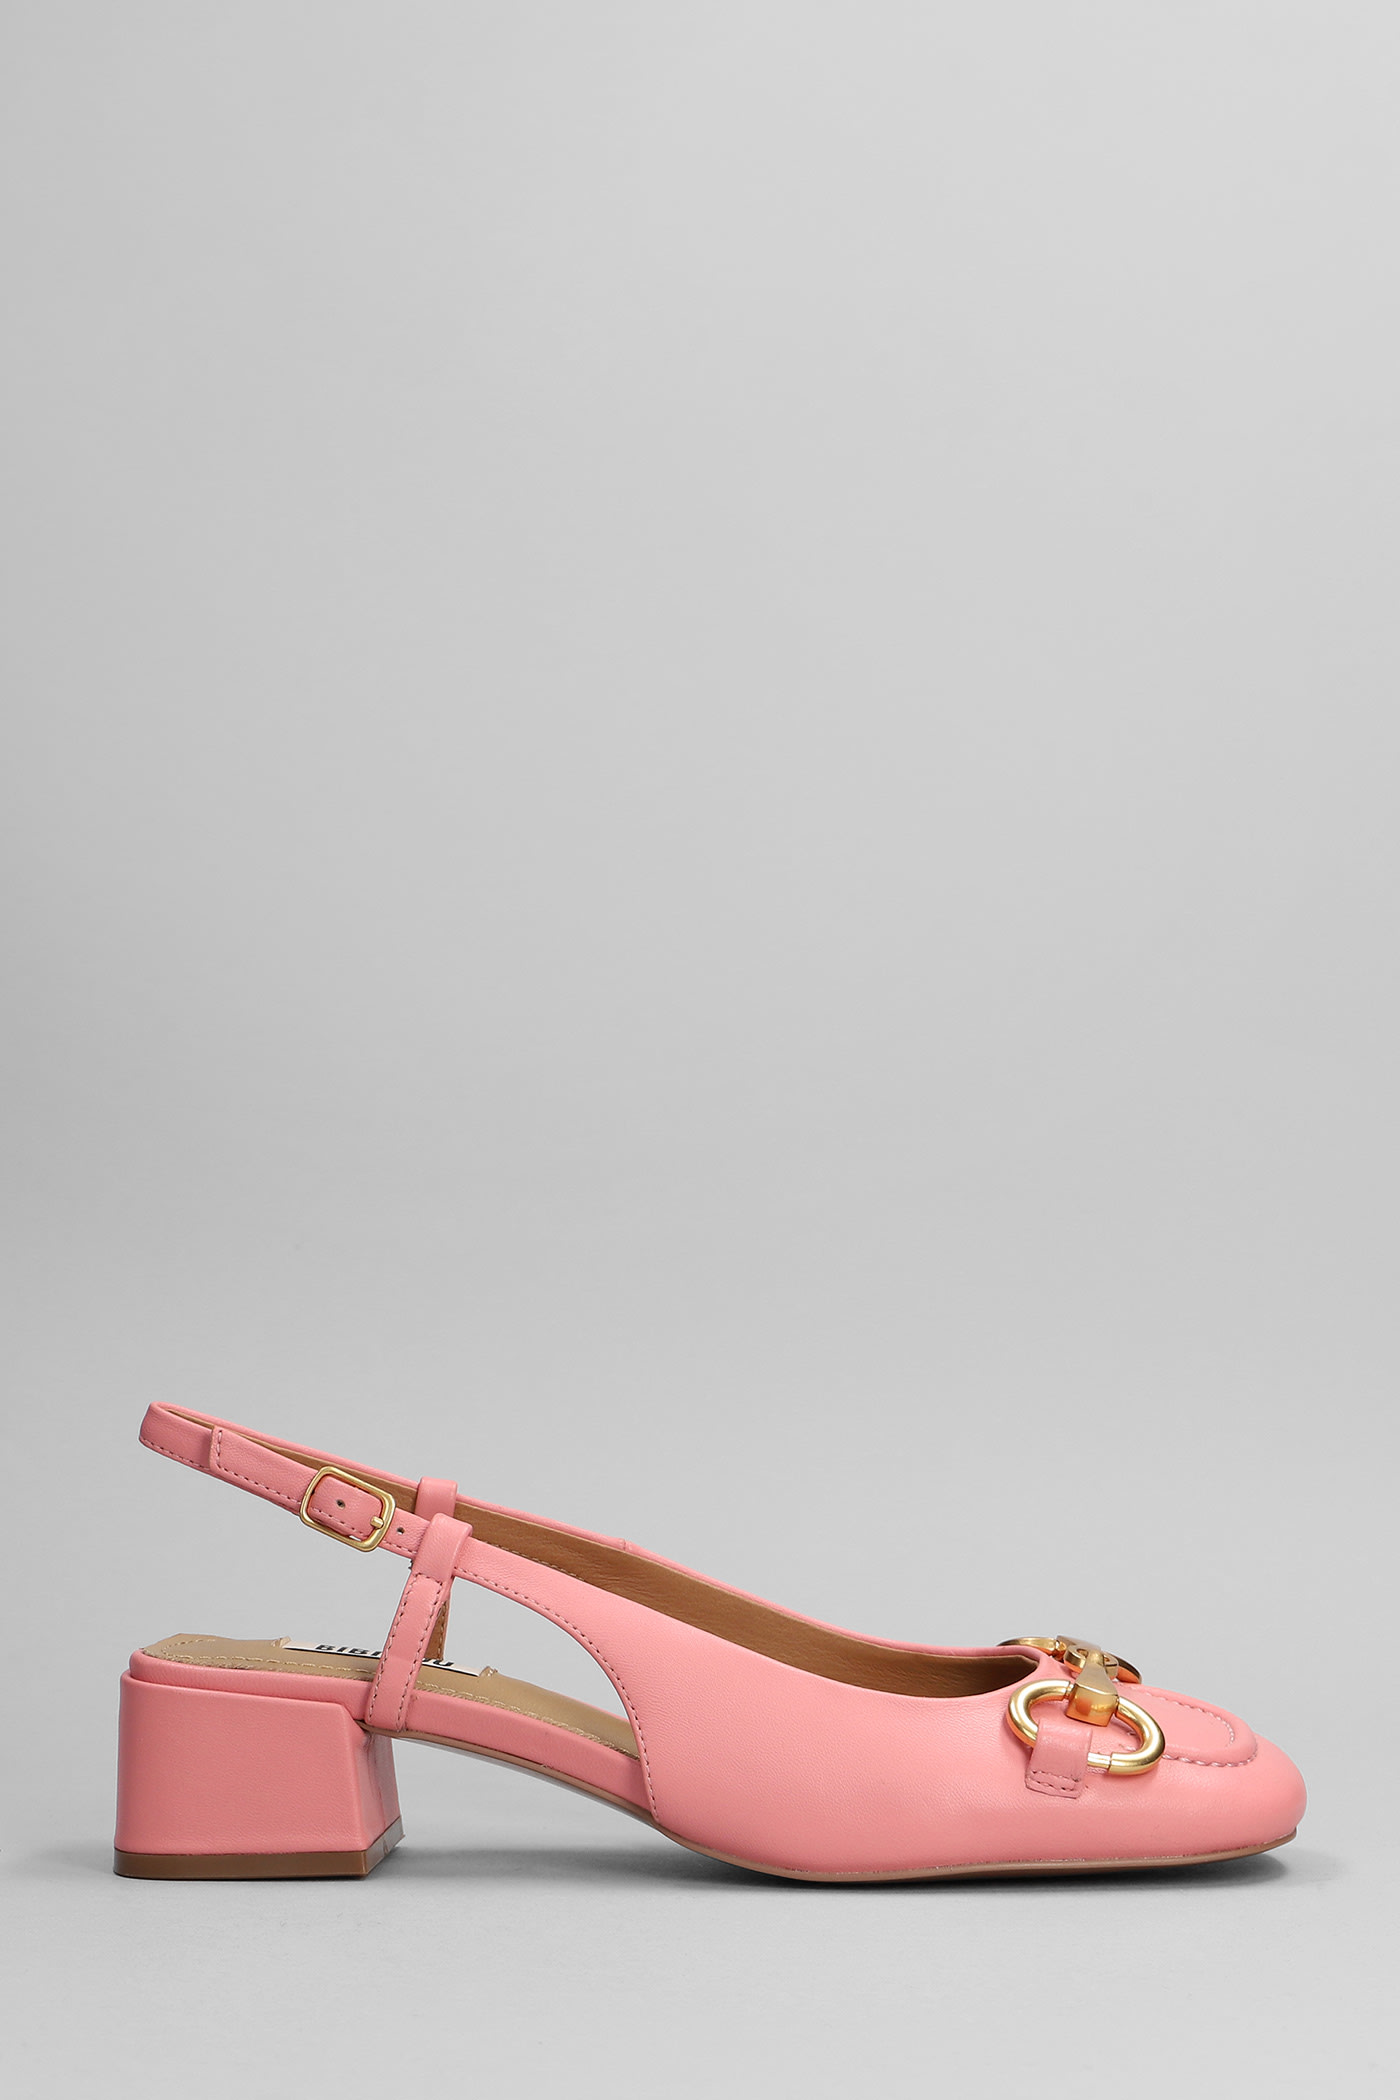 Bibi Lou Sandals In Rose-pink Leather